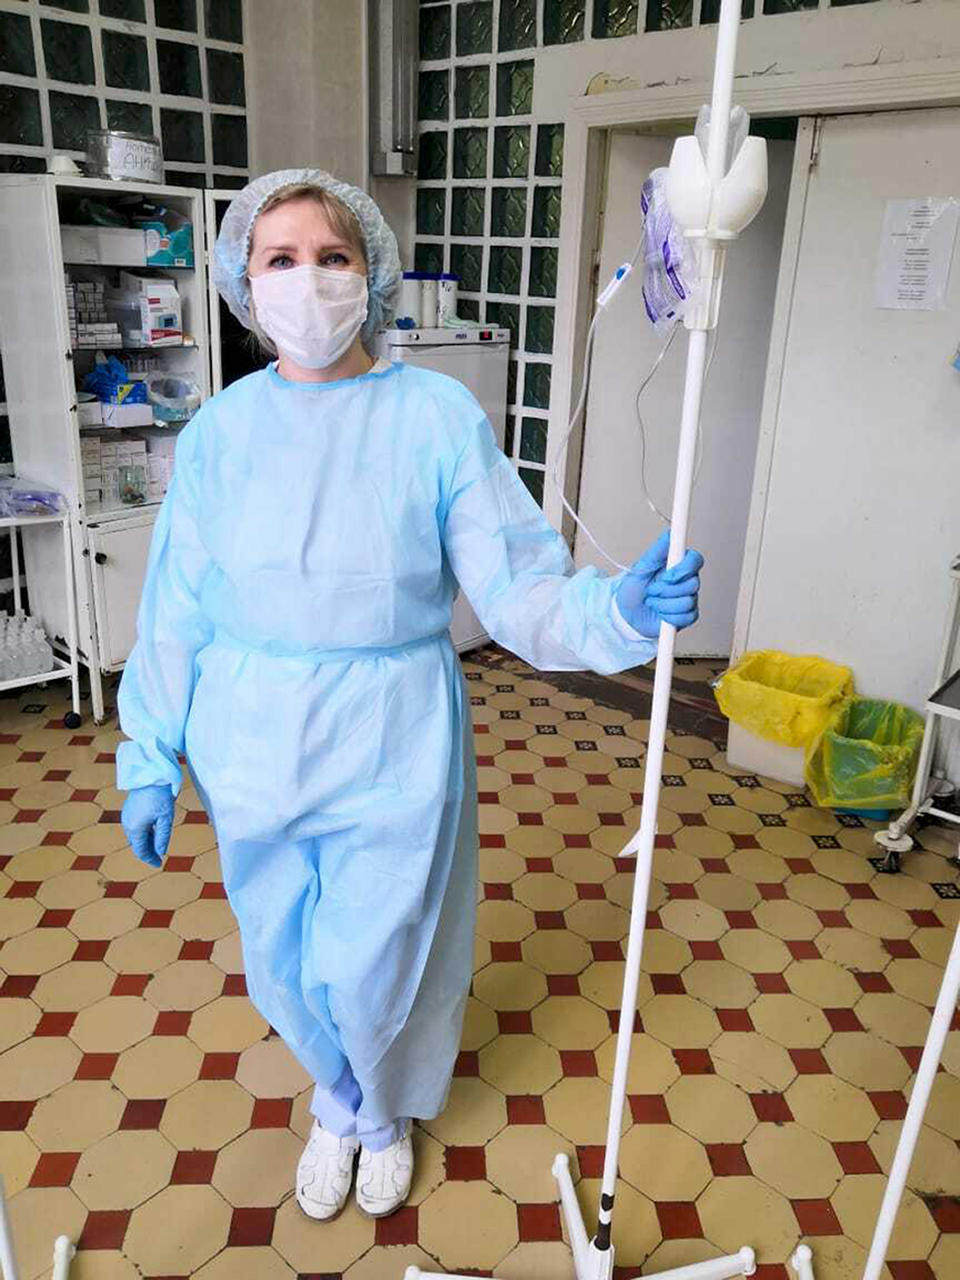 In this photo taken on April 13, 2020, and provided by Nina Rogova, Nina Rogova, a nurse at a local hospital, poses for a photo in Karabanovo, Vladimir region 200 kilometers (120 miles) east of Moscow, Russia, Wednesday, May 20, 2020. Rogova and her colleagues lived in their hospital ward for six days as it was locked down for quarantine after one of the patients tested positive for the virus. Rogova, who is now recovering after contracting the virus at work, complained about shortages of protective gear to local media and now fears for her job. (Courtesy of Nina Rogova via AP)